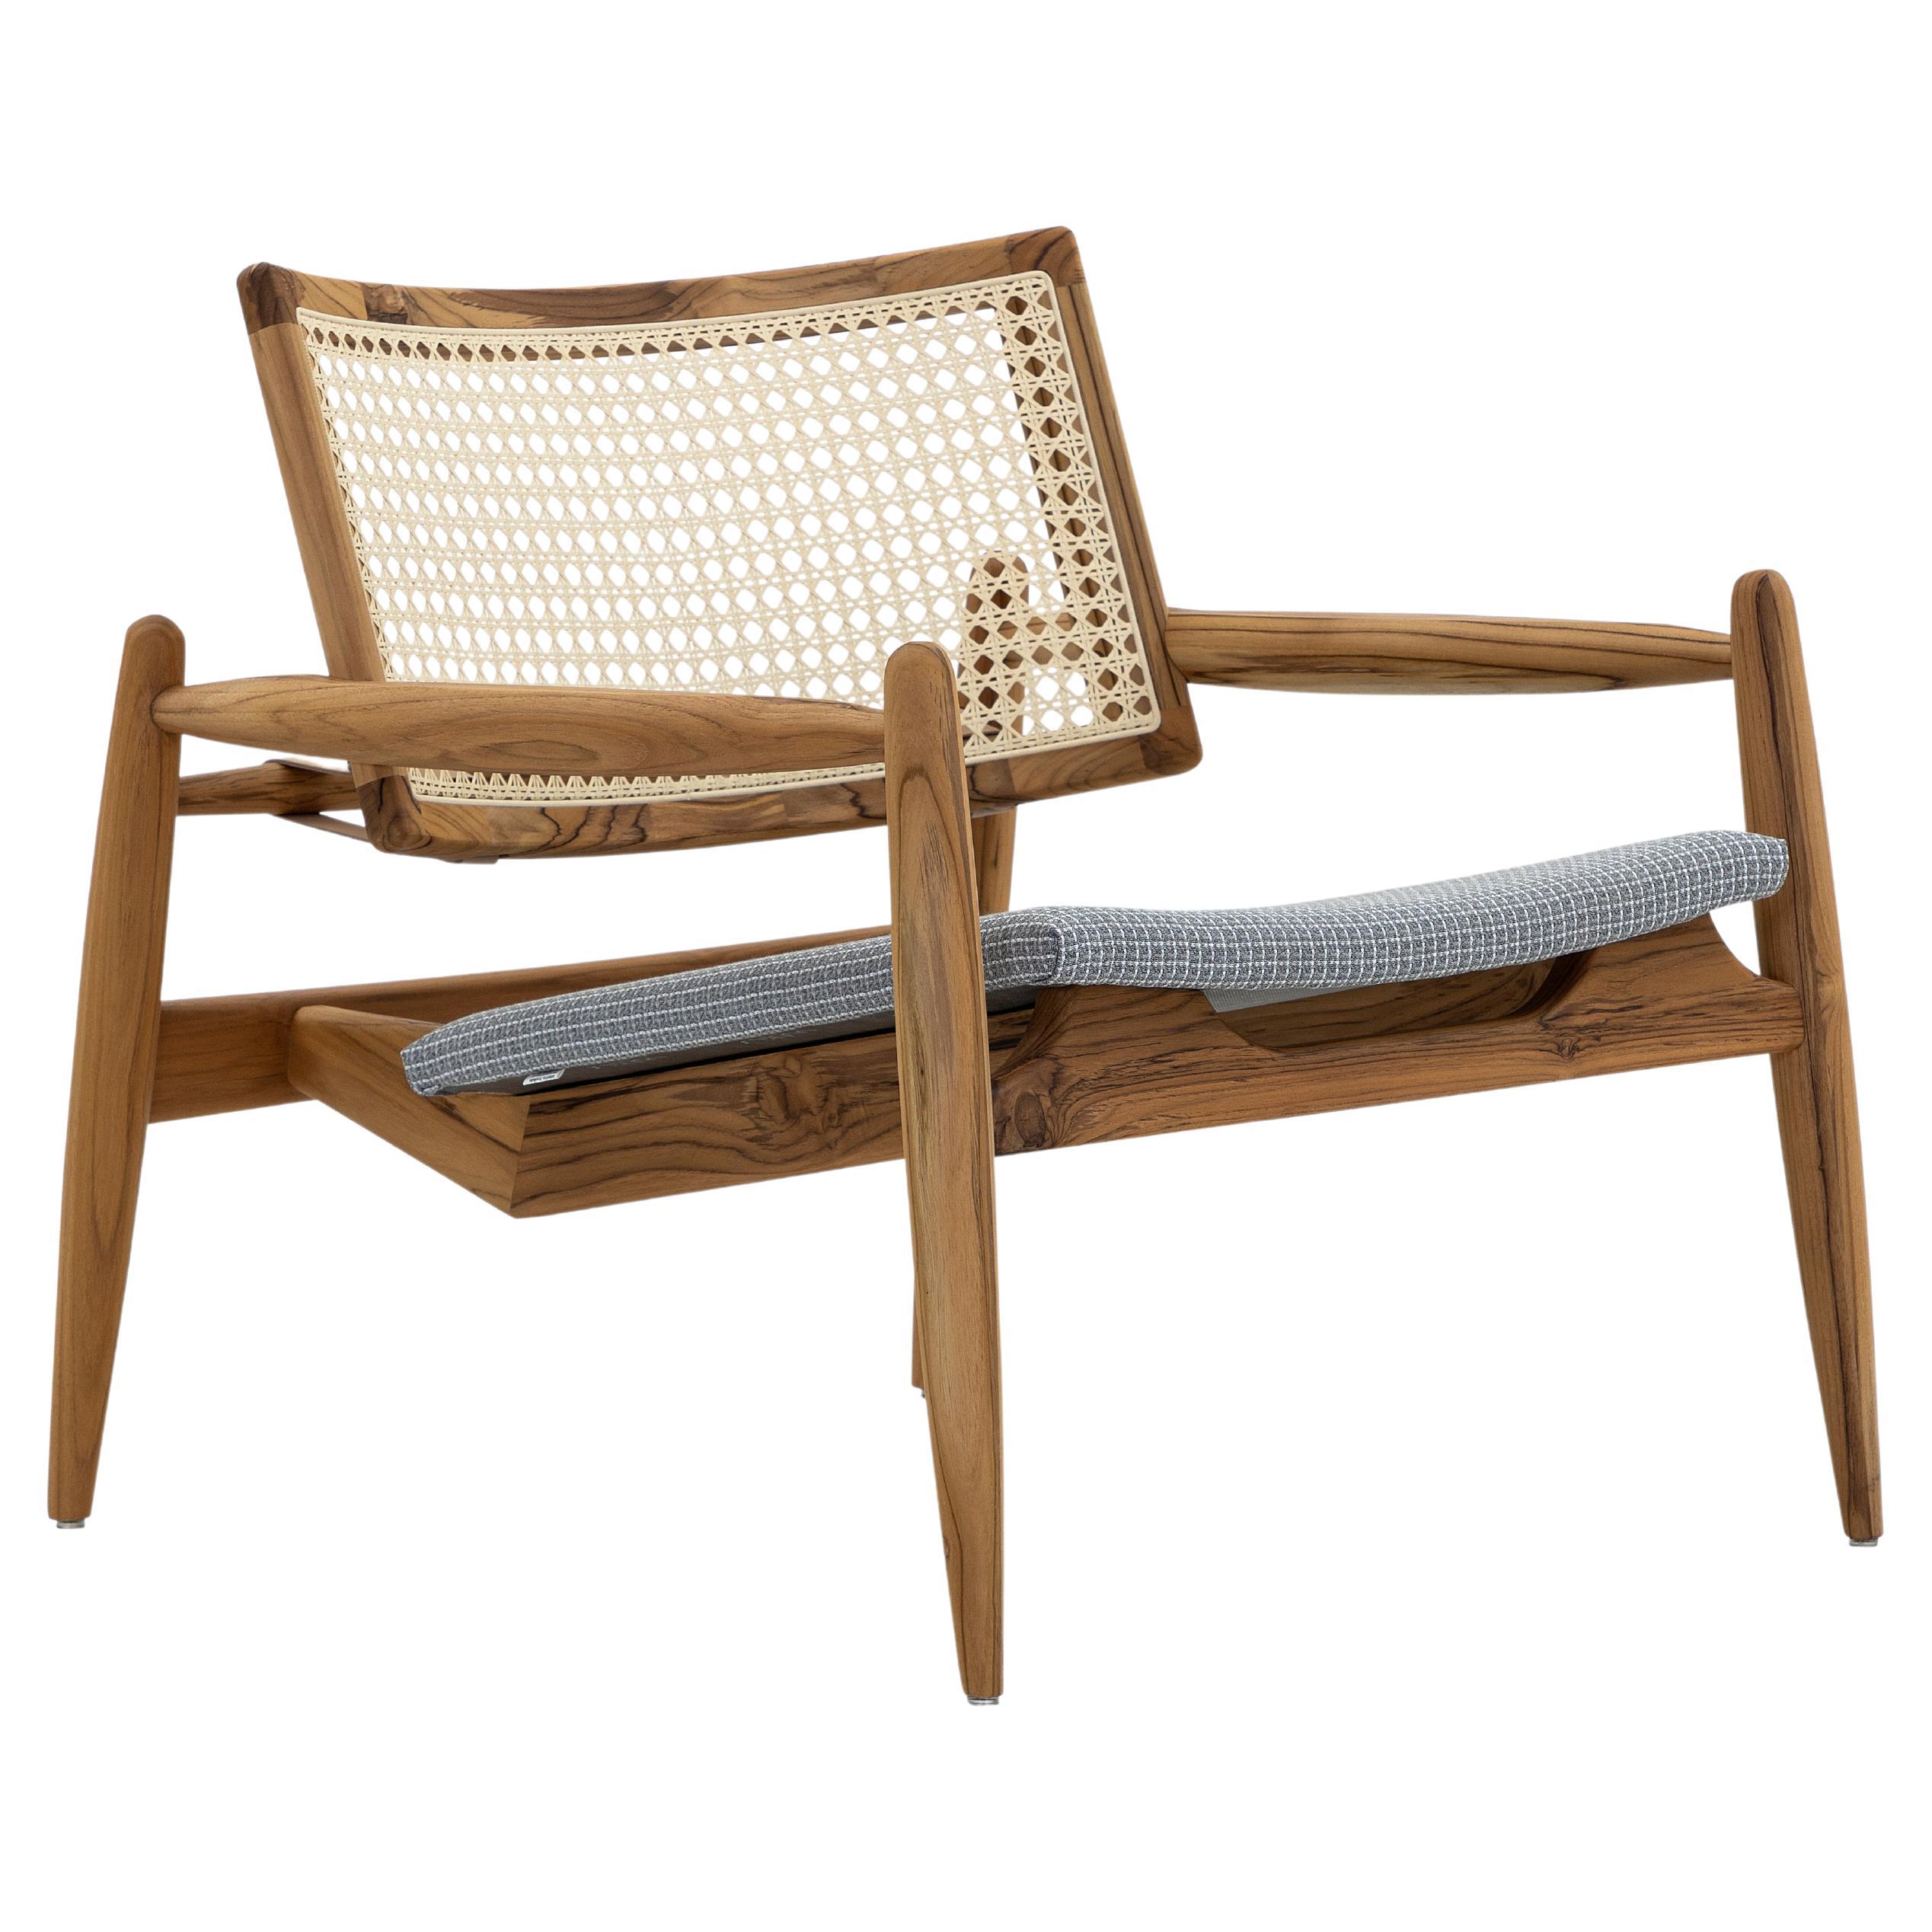 Soho Curved Cane-Back Chair in Teak Wood Finish and Gray Plaid Fabric